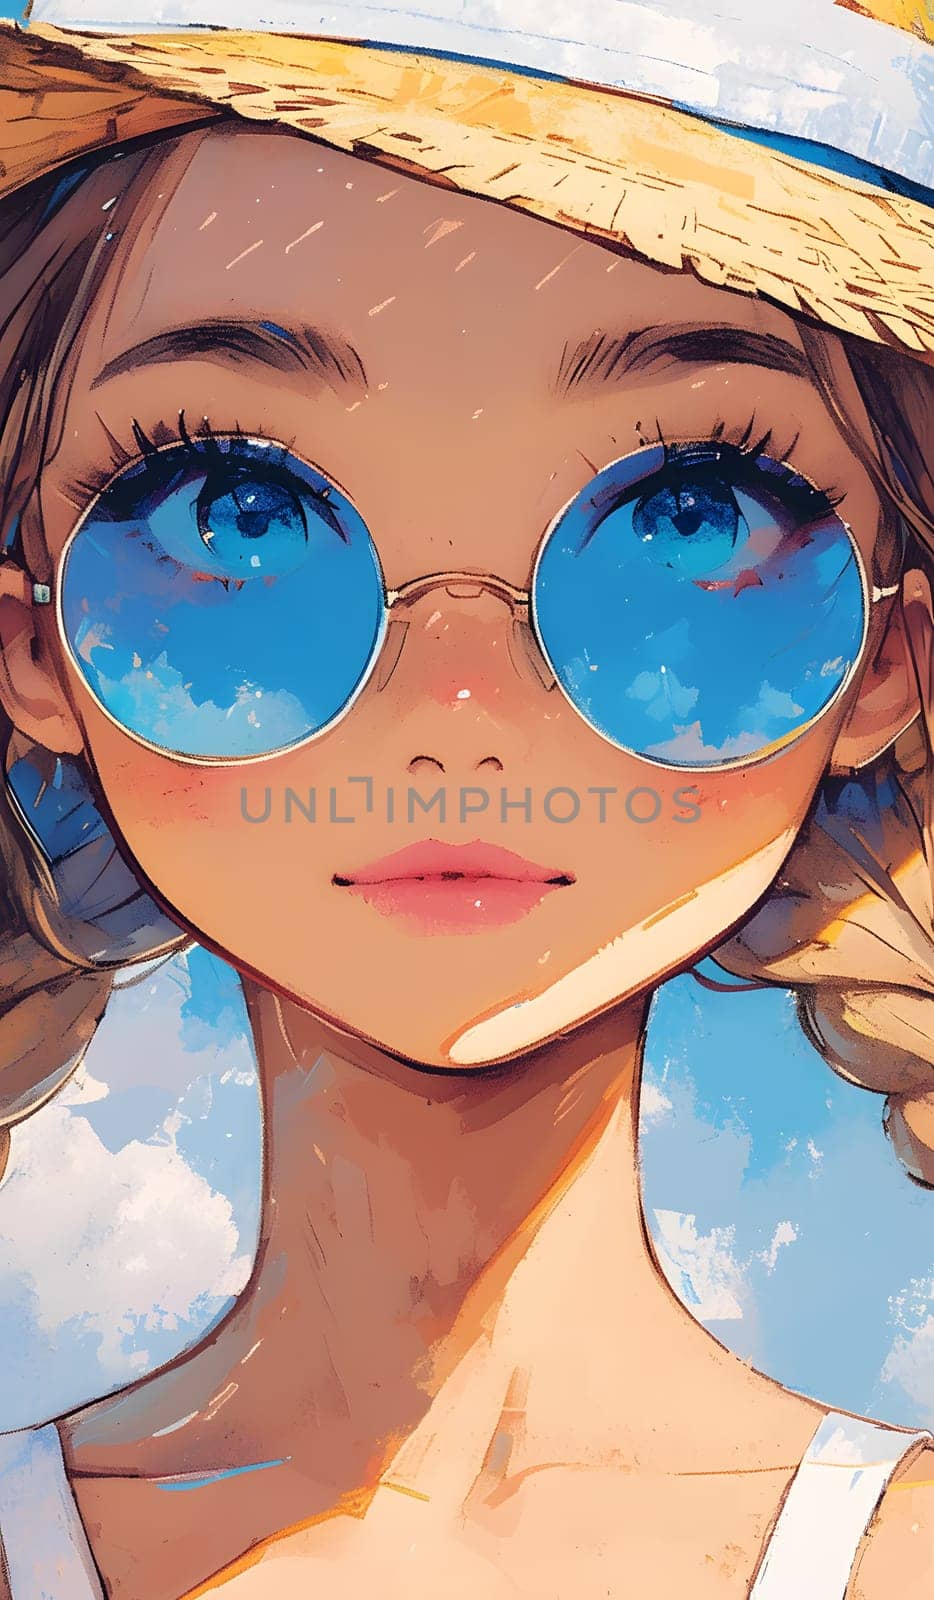 A girl with sunglasses and a hat gazes upwards at the sky, protecting her eyes with stylish eyewear. Her nose, hair, and lashes frame her vision with care